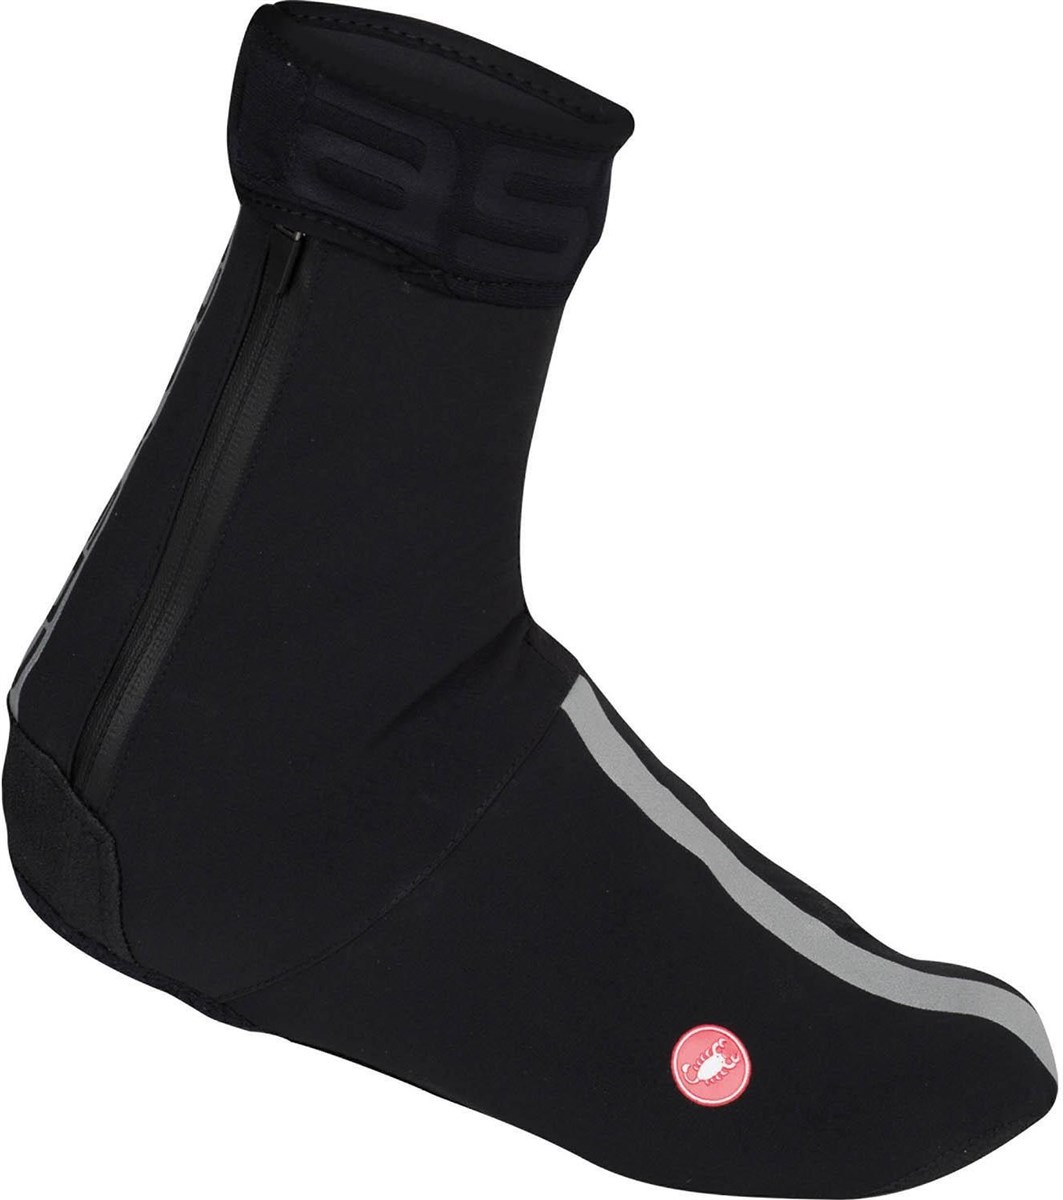 Castelli Tempesta Cycling Shoecovers SS17 product image